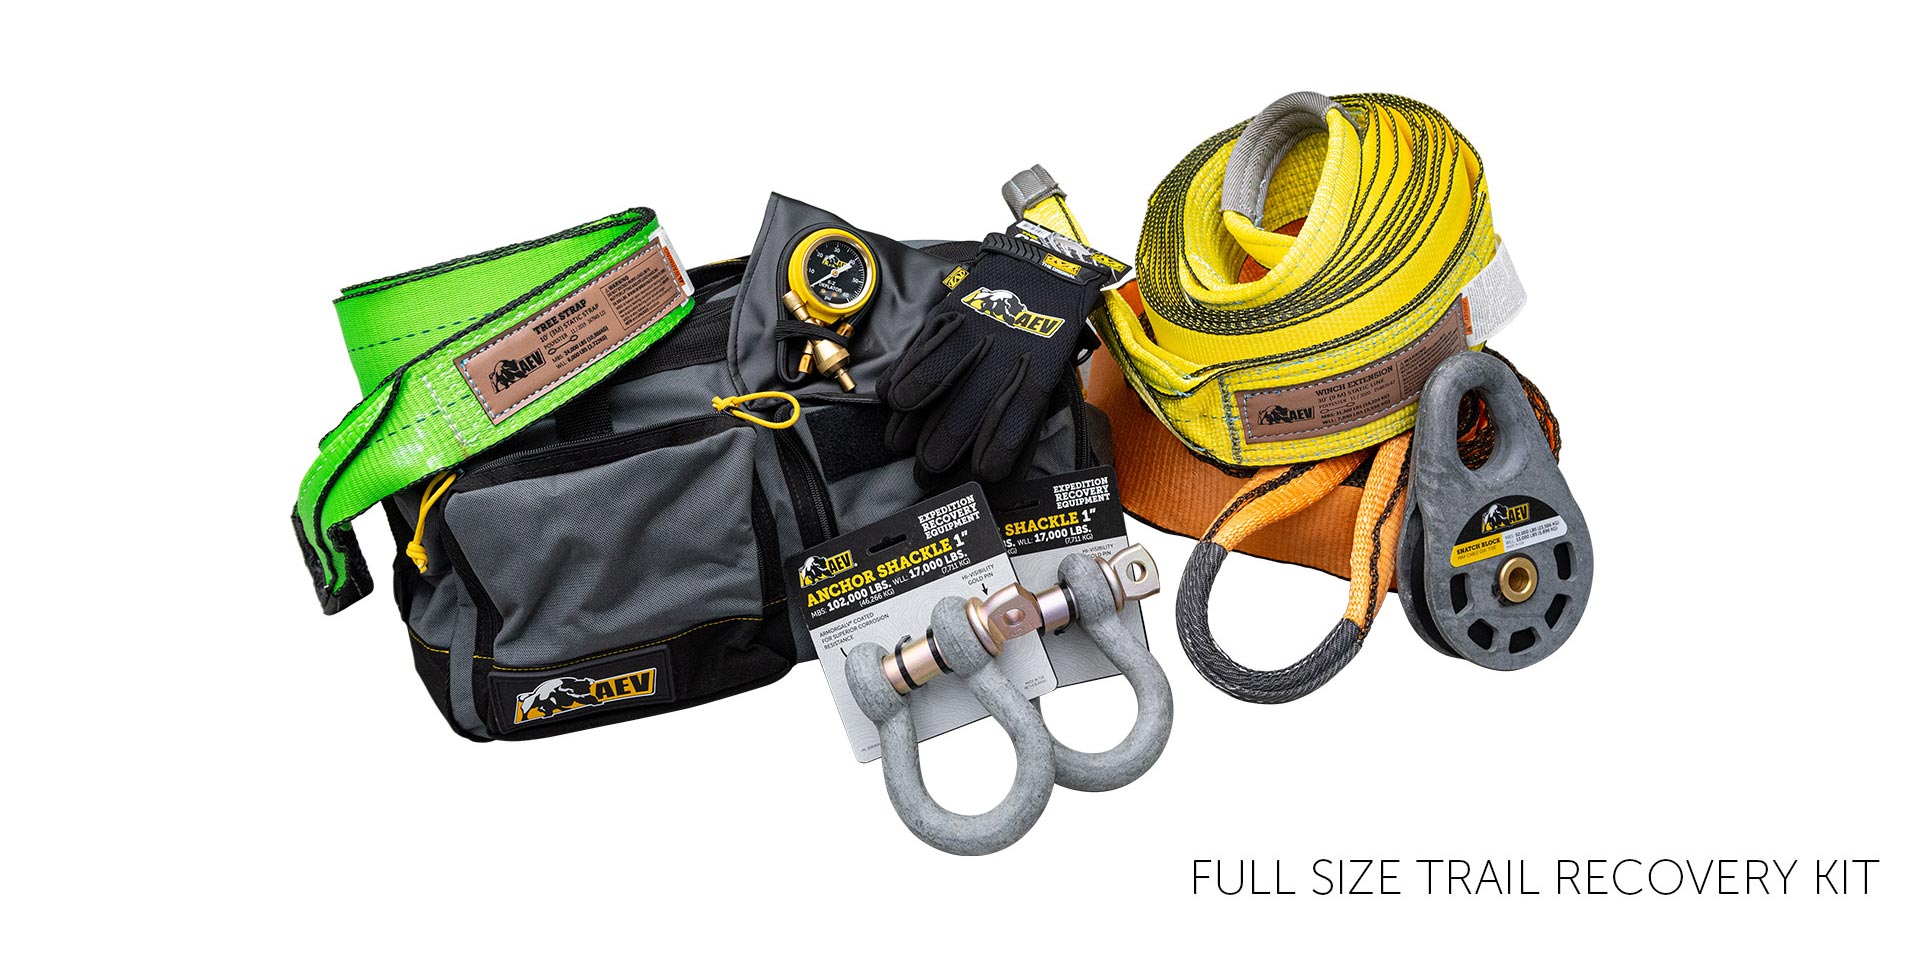 Full-Size Recovery Gear Kits